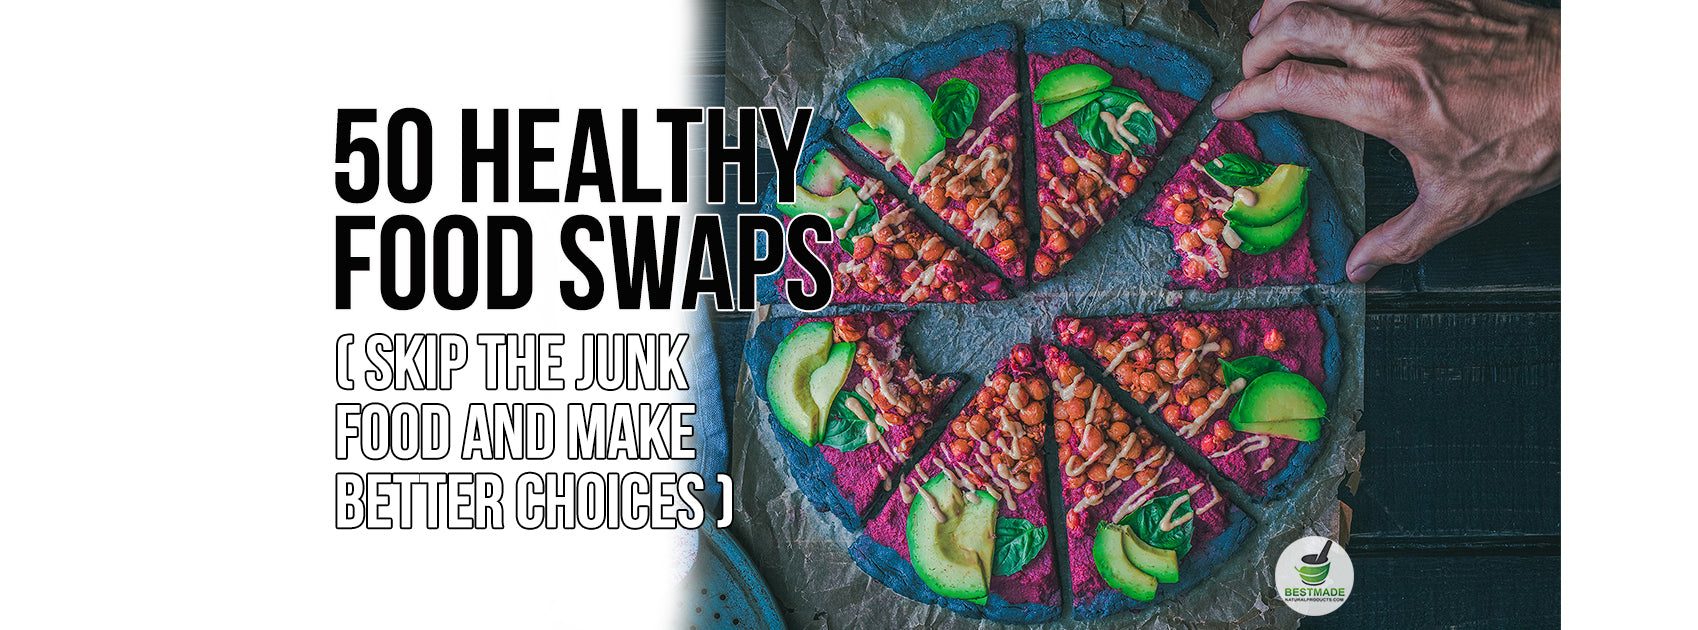 50 Healthy Food Swaps (Skip the Junk Food Better Choices)